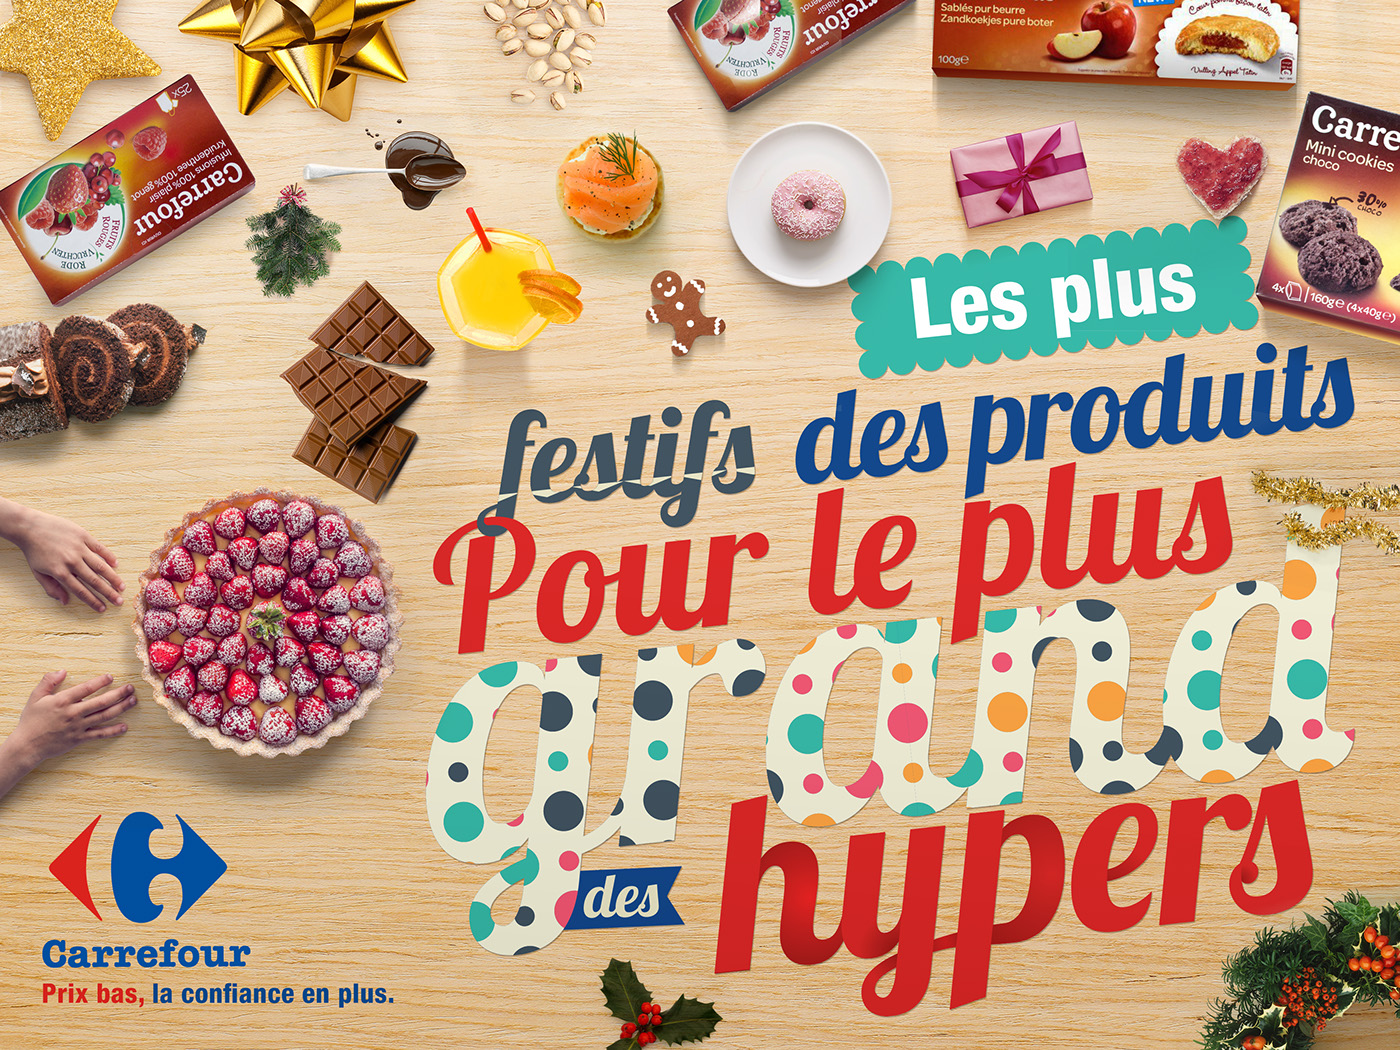 Carrefour new year nouvel an print campaign